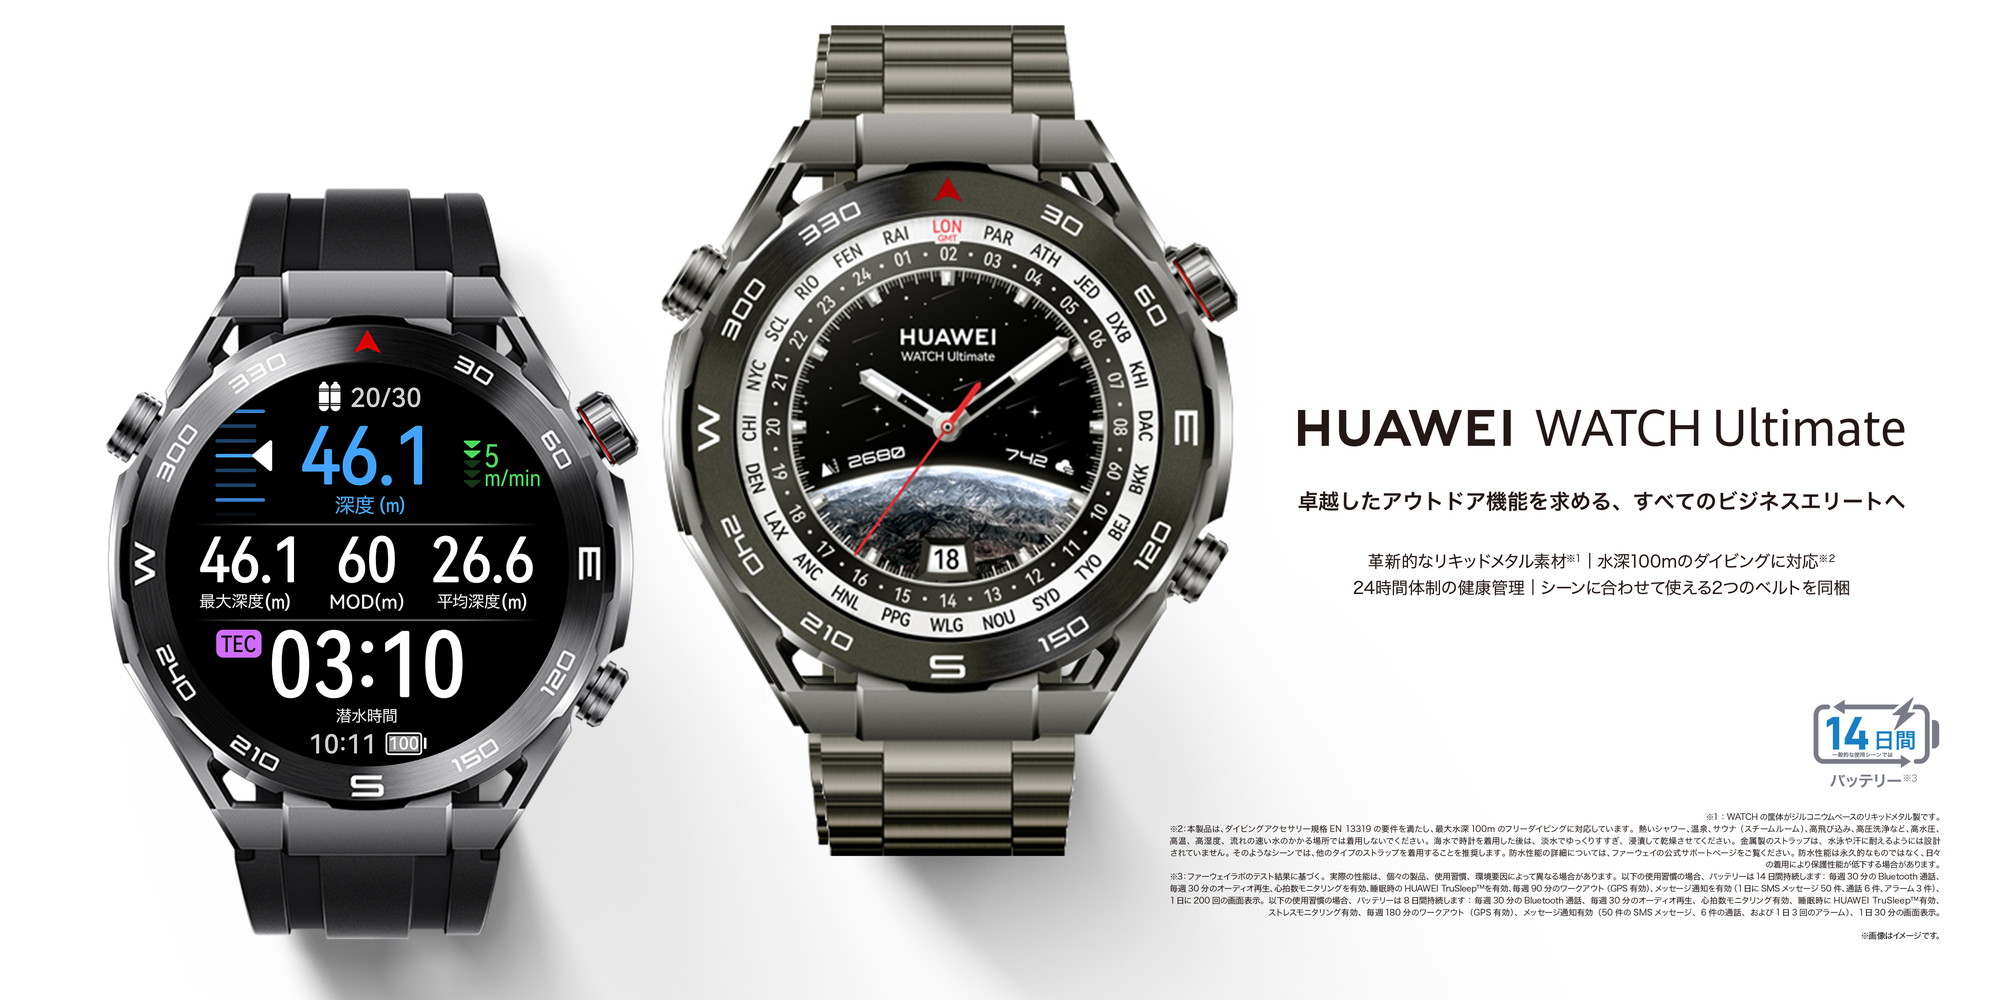 「HUAWEI WATCH Ultimate」に新色EXPEDITION BLACK、26日発売